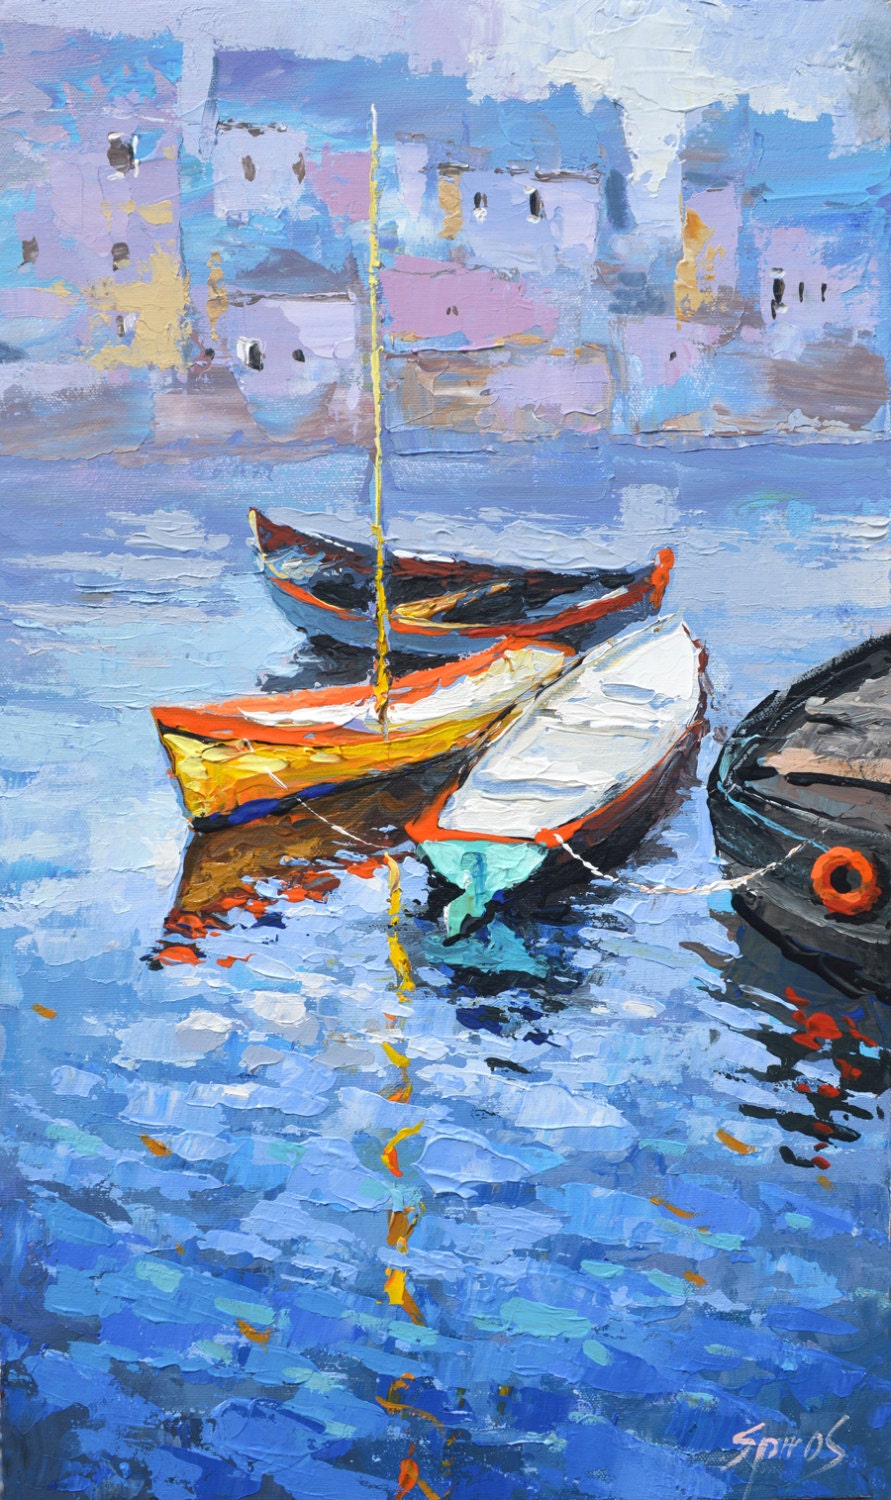 lonely boat oil painting on canvas by dmitry spiros